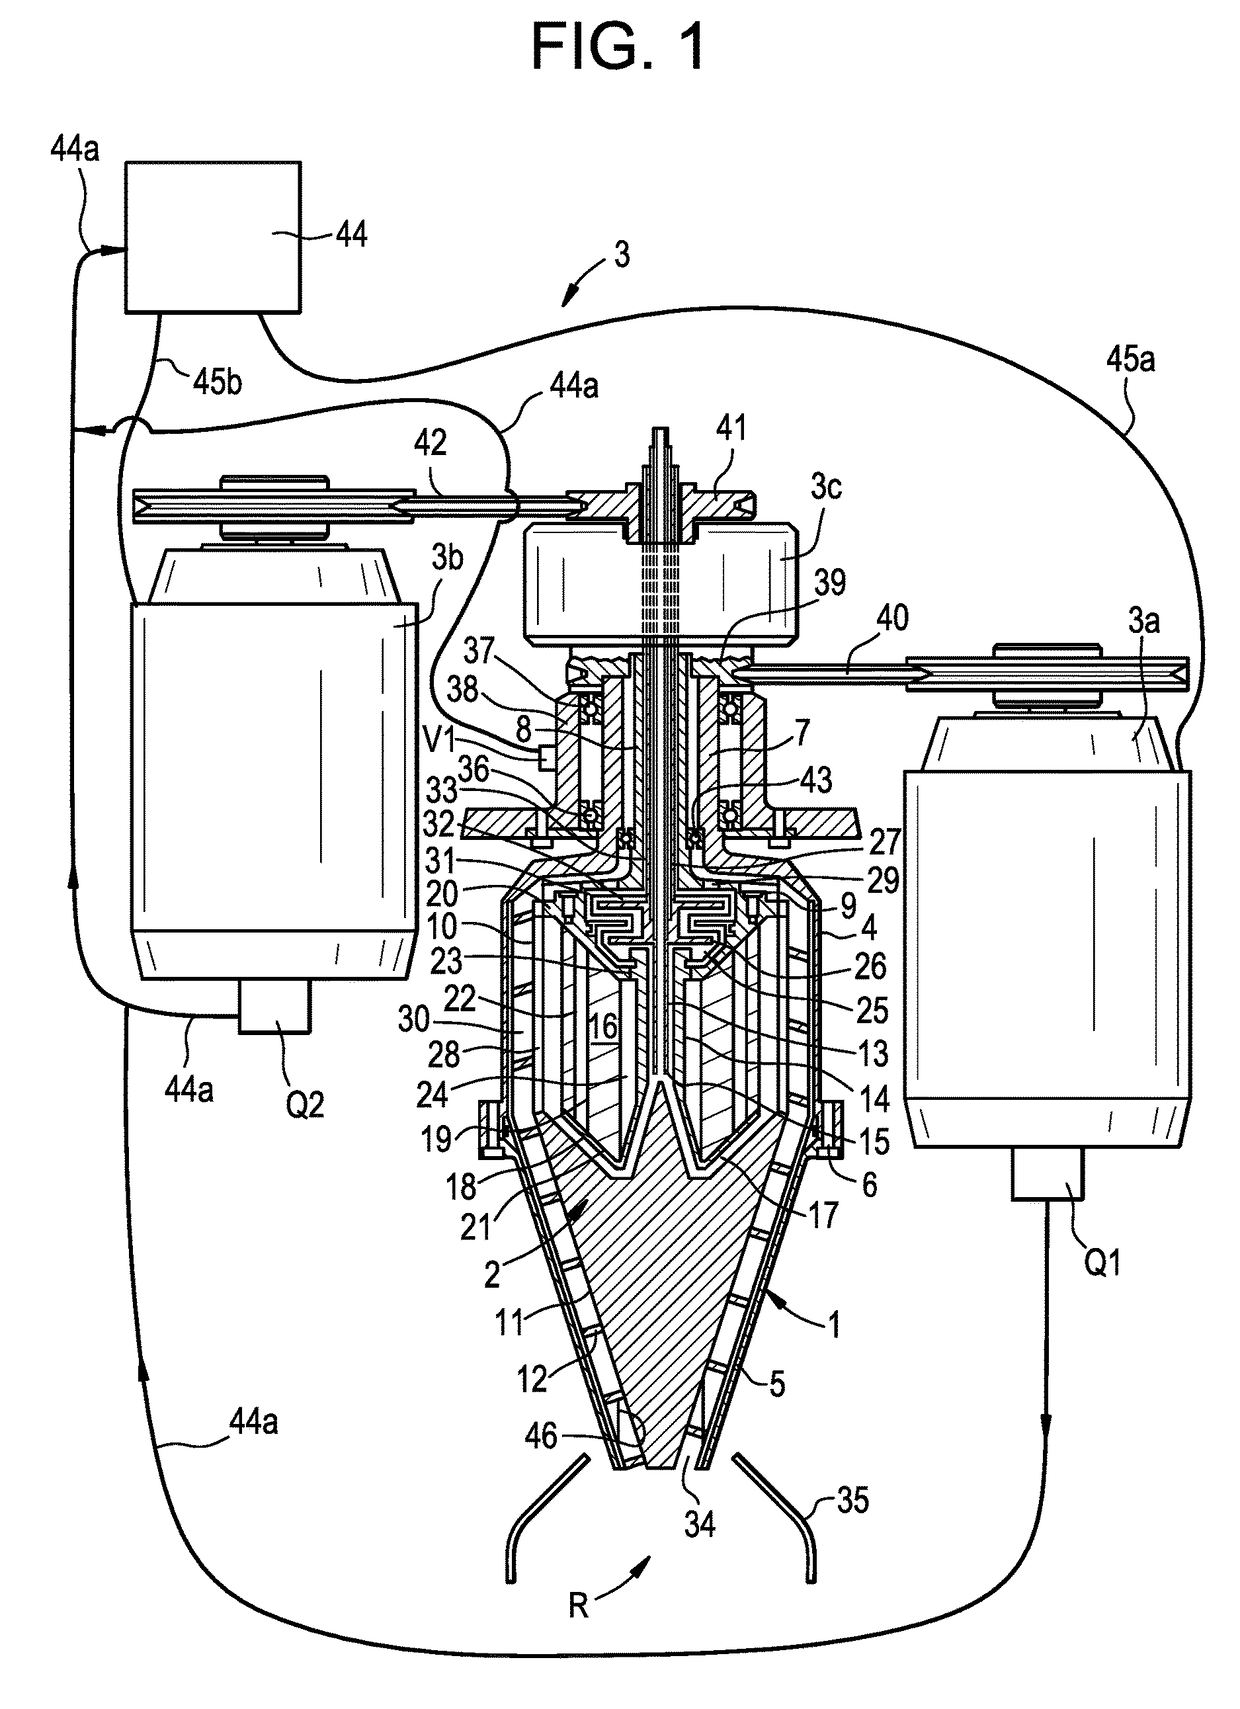 Centrifugal separator with a control unit for speed control